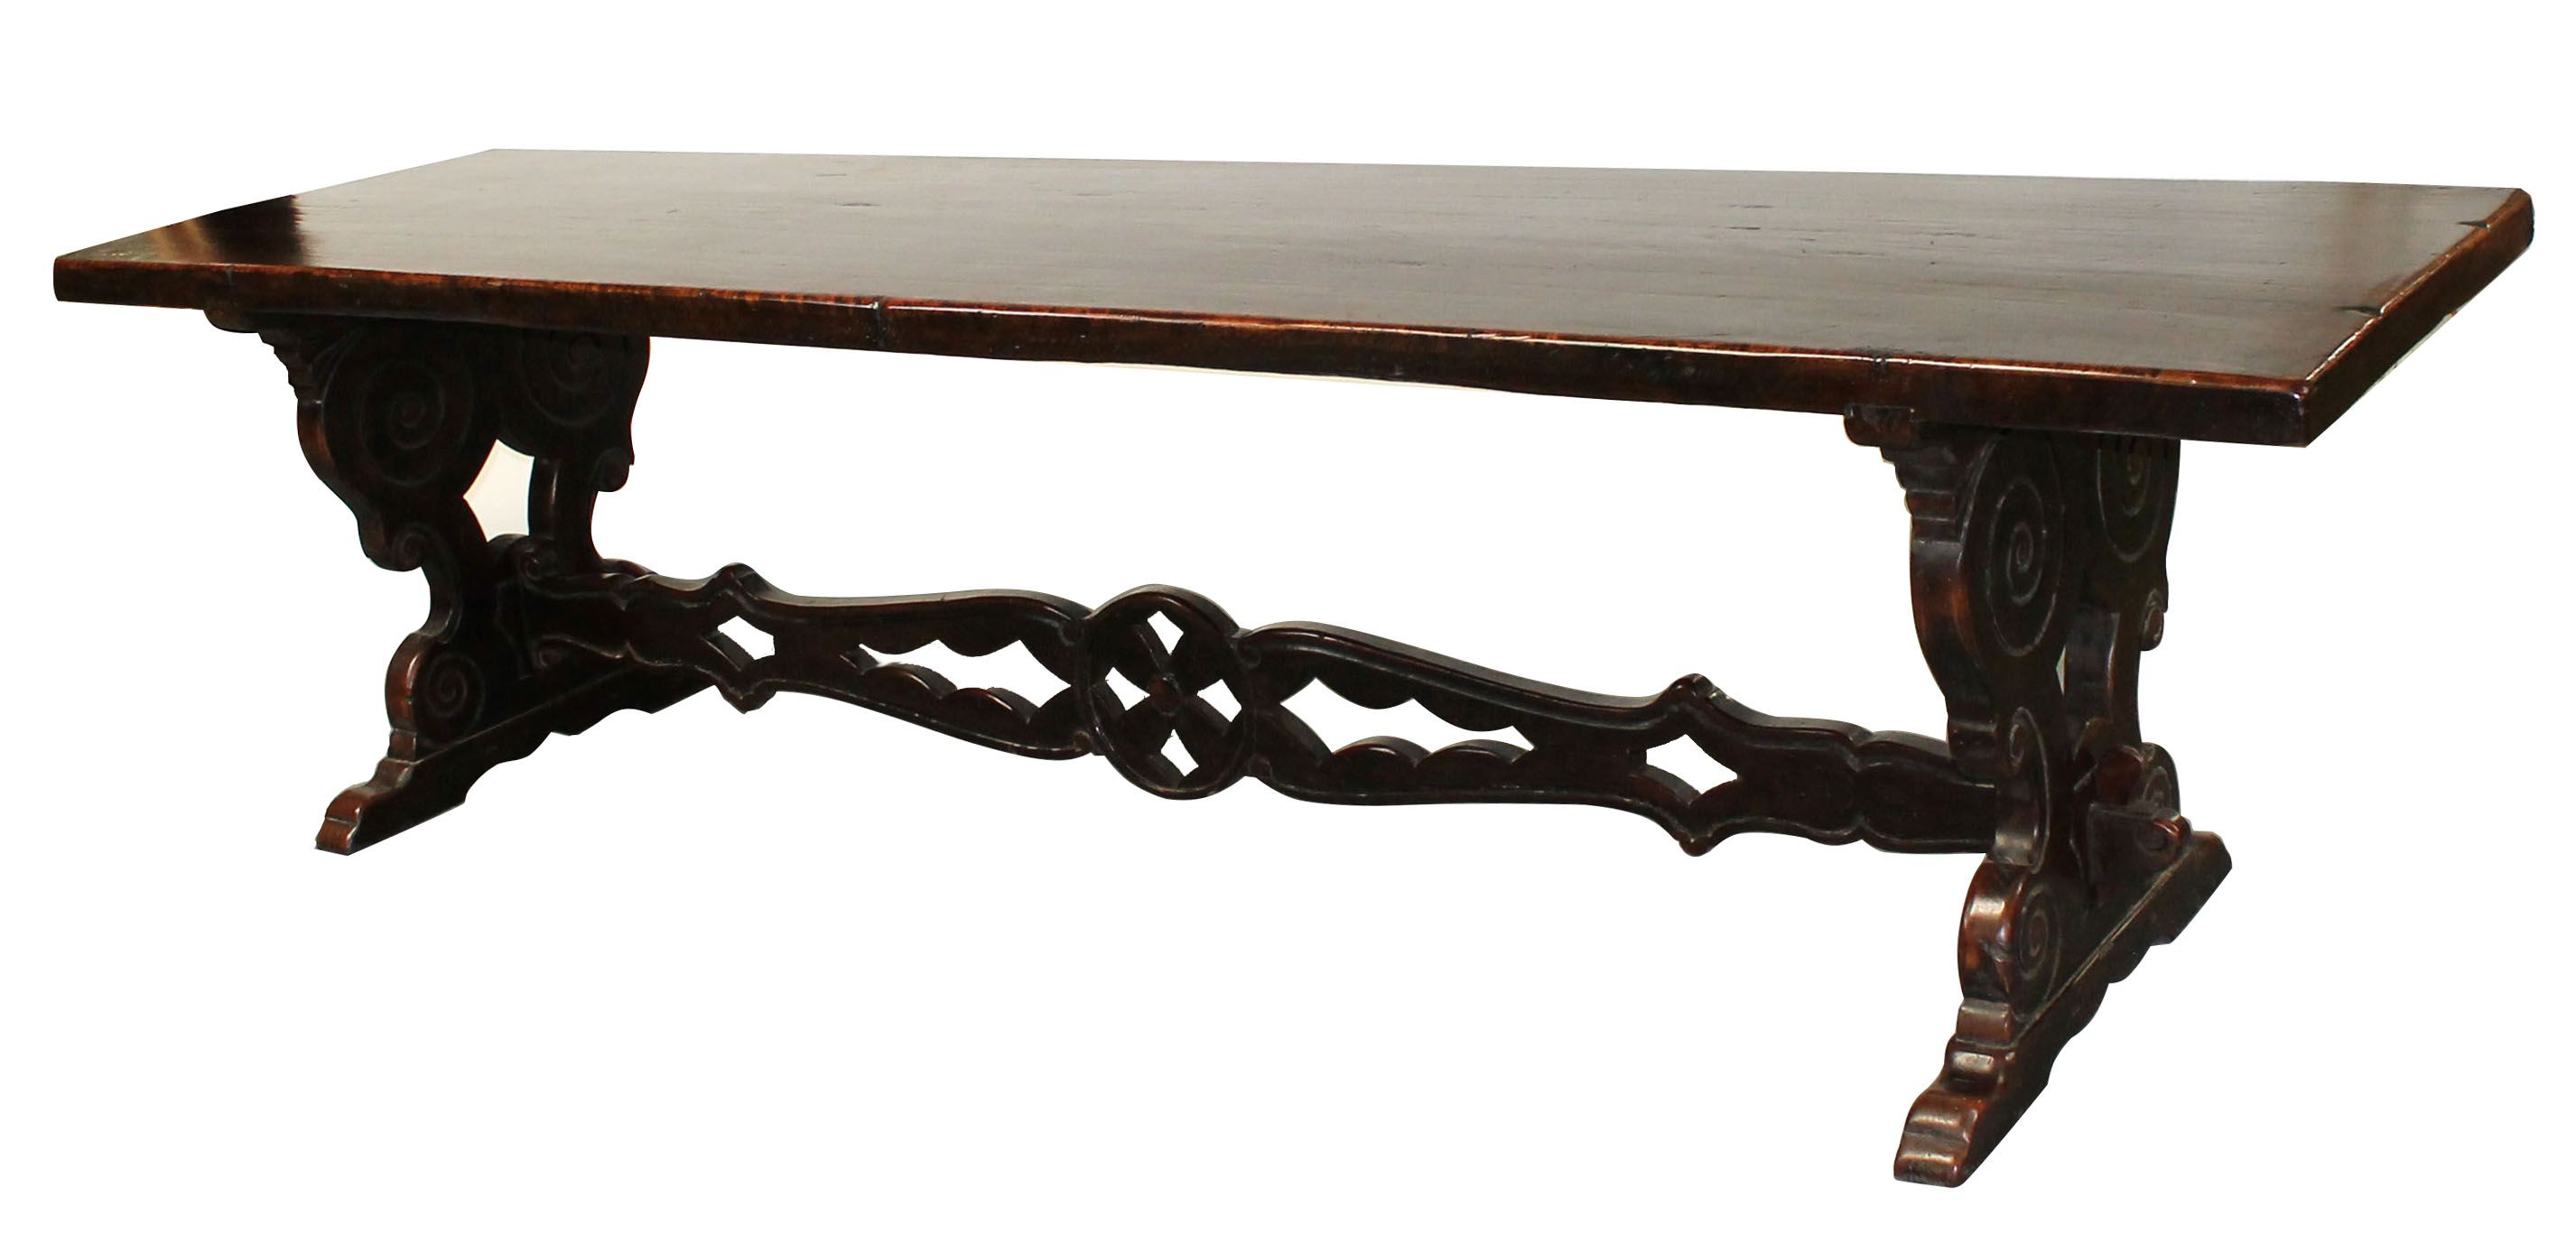 Tuscan walnut trestle table with pierce carved stretcher - 118"long
